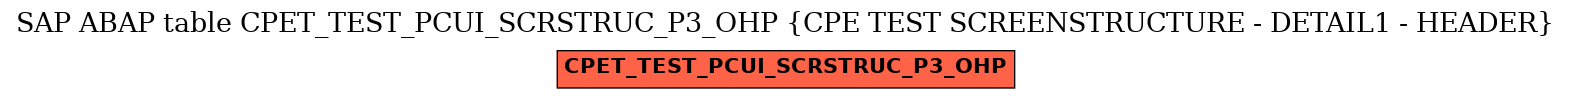 E-R Diagram for table CPET_TEST_PCUI_SCRSTRUC_P3_OHP (CPE TEST SCREENSTRUCTURE - DETAIL1 - HEADER)